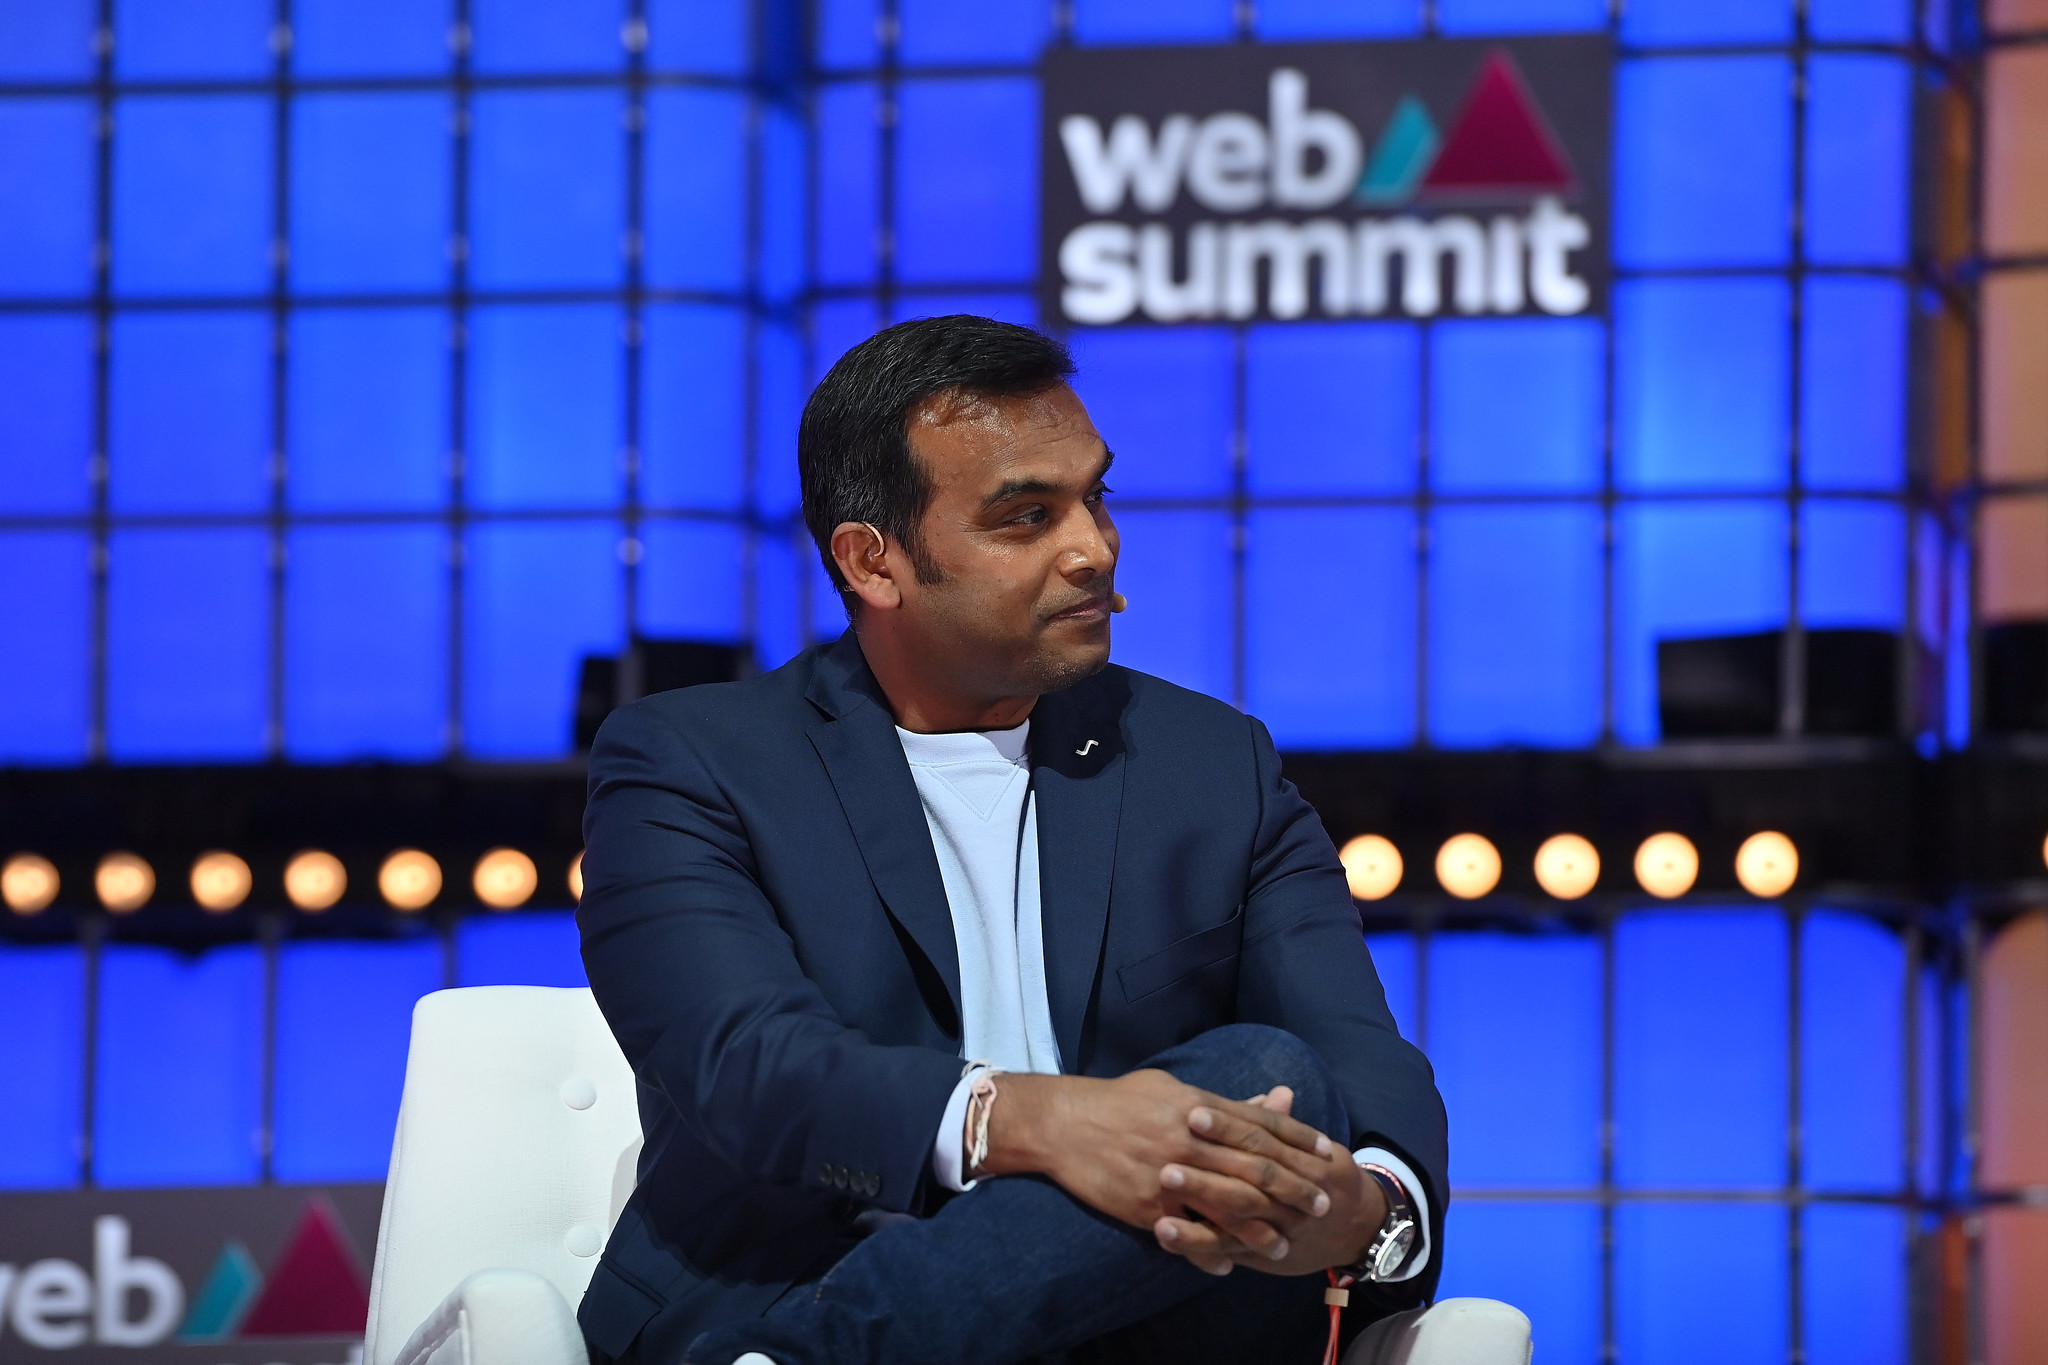 A photograph of a person (Parag Parekh, Chief Digital Officer of IKEA) sitting on a chair on stage at Web Summit. They have their hands crossed and placed on their knee. They appear to be engaged in conversation. The Web Summit logo is visible in the background.